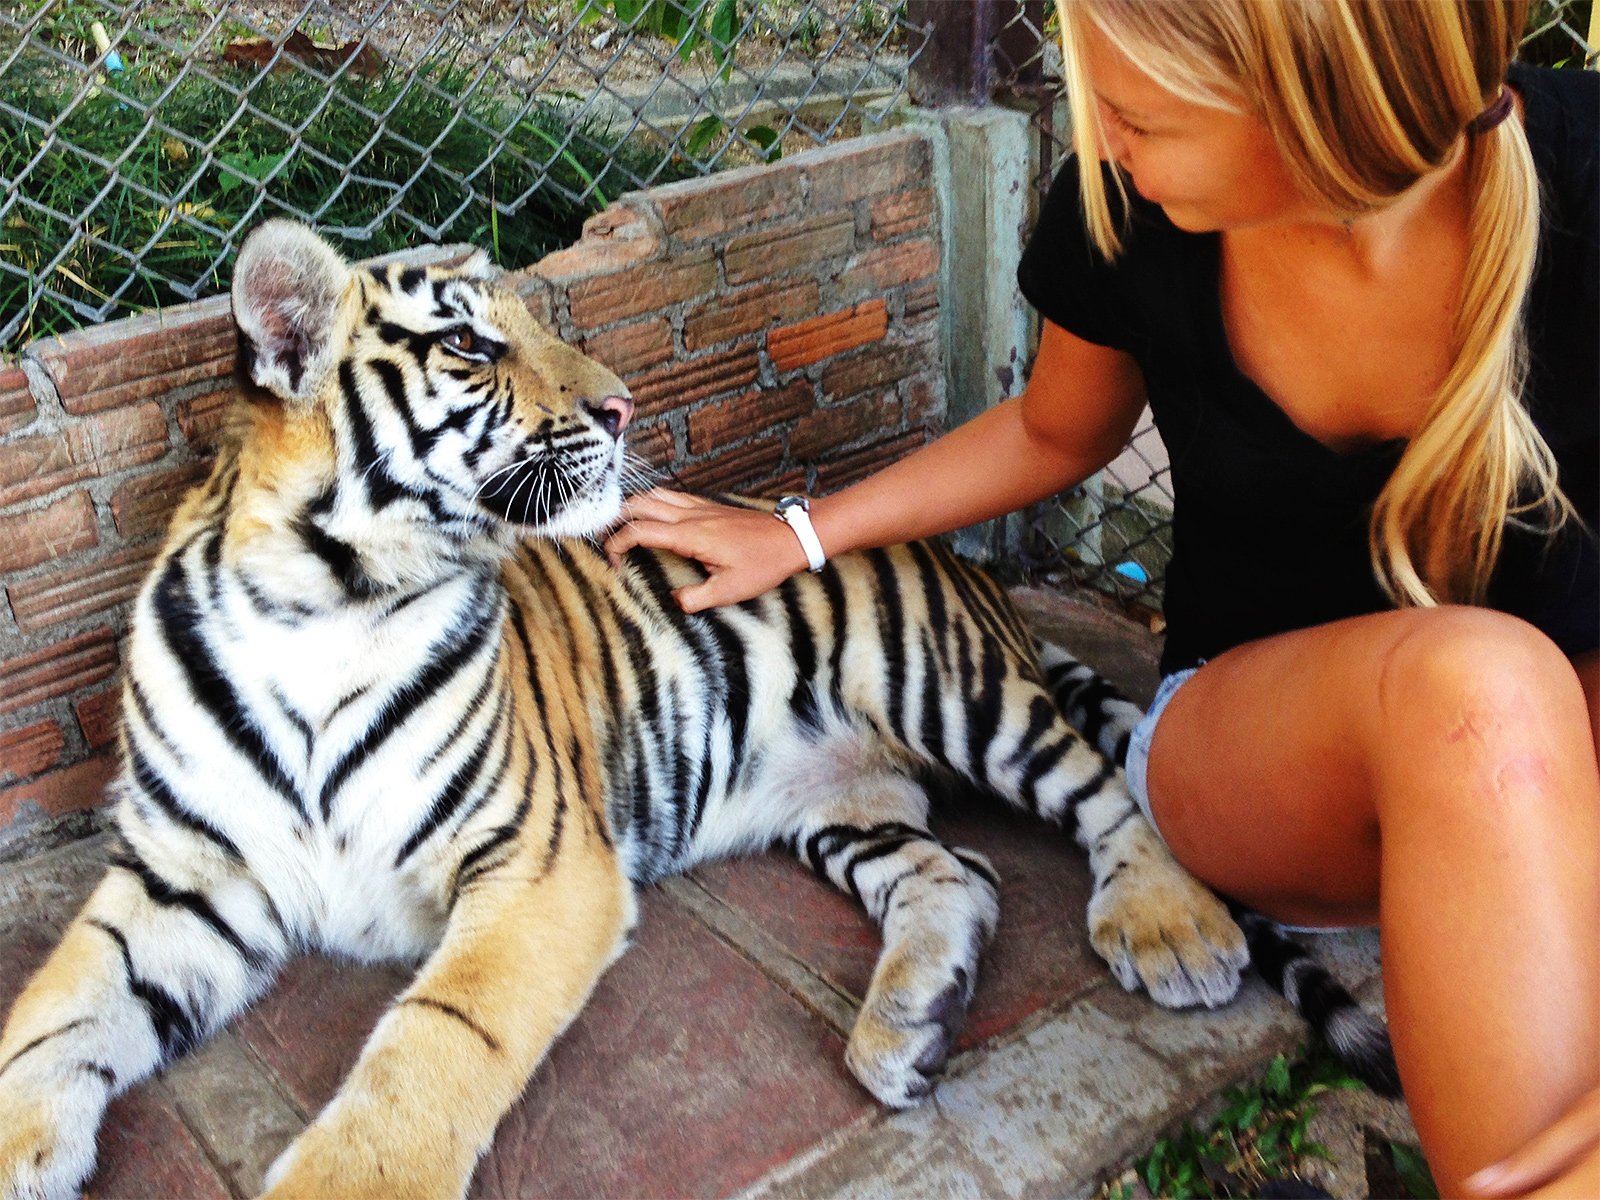 How to feed the tiger cubs in Phuket